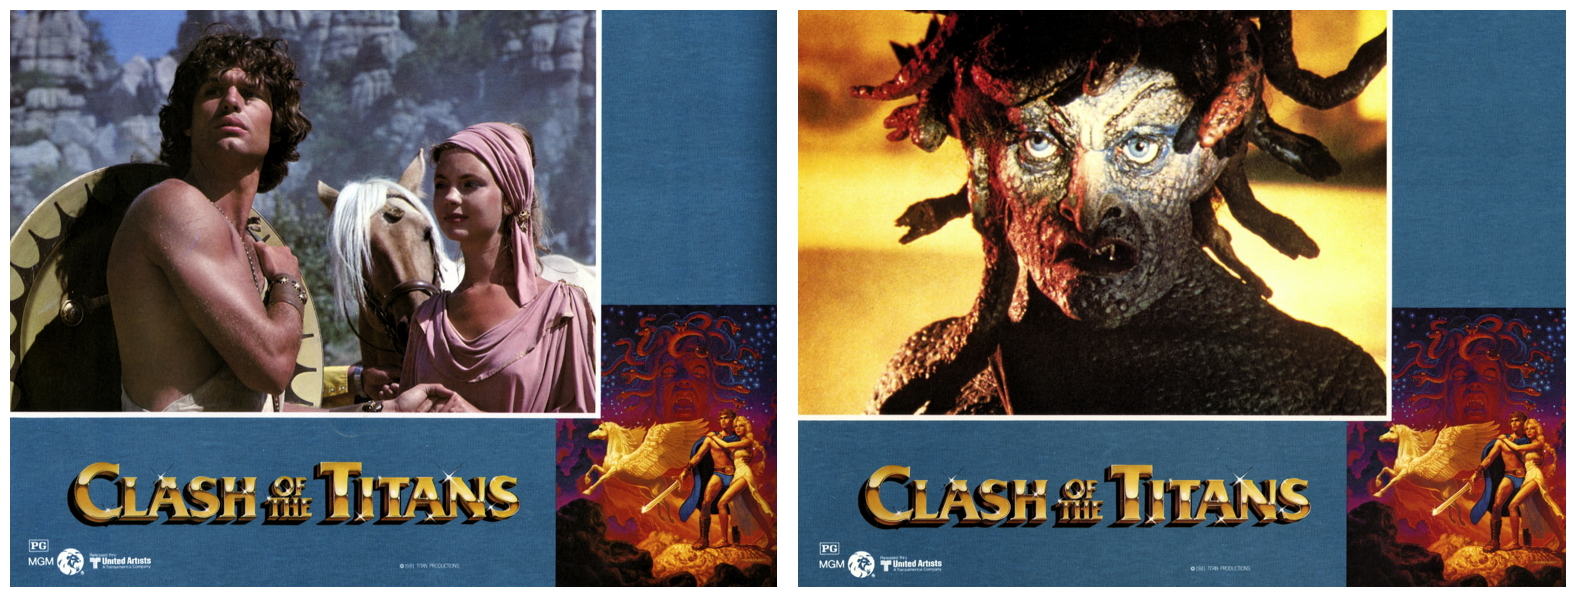 Clash Of The Titans lobby cards 4